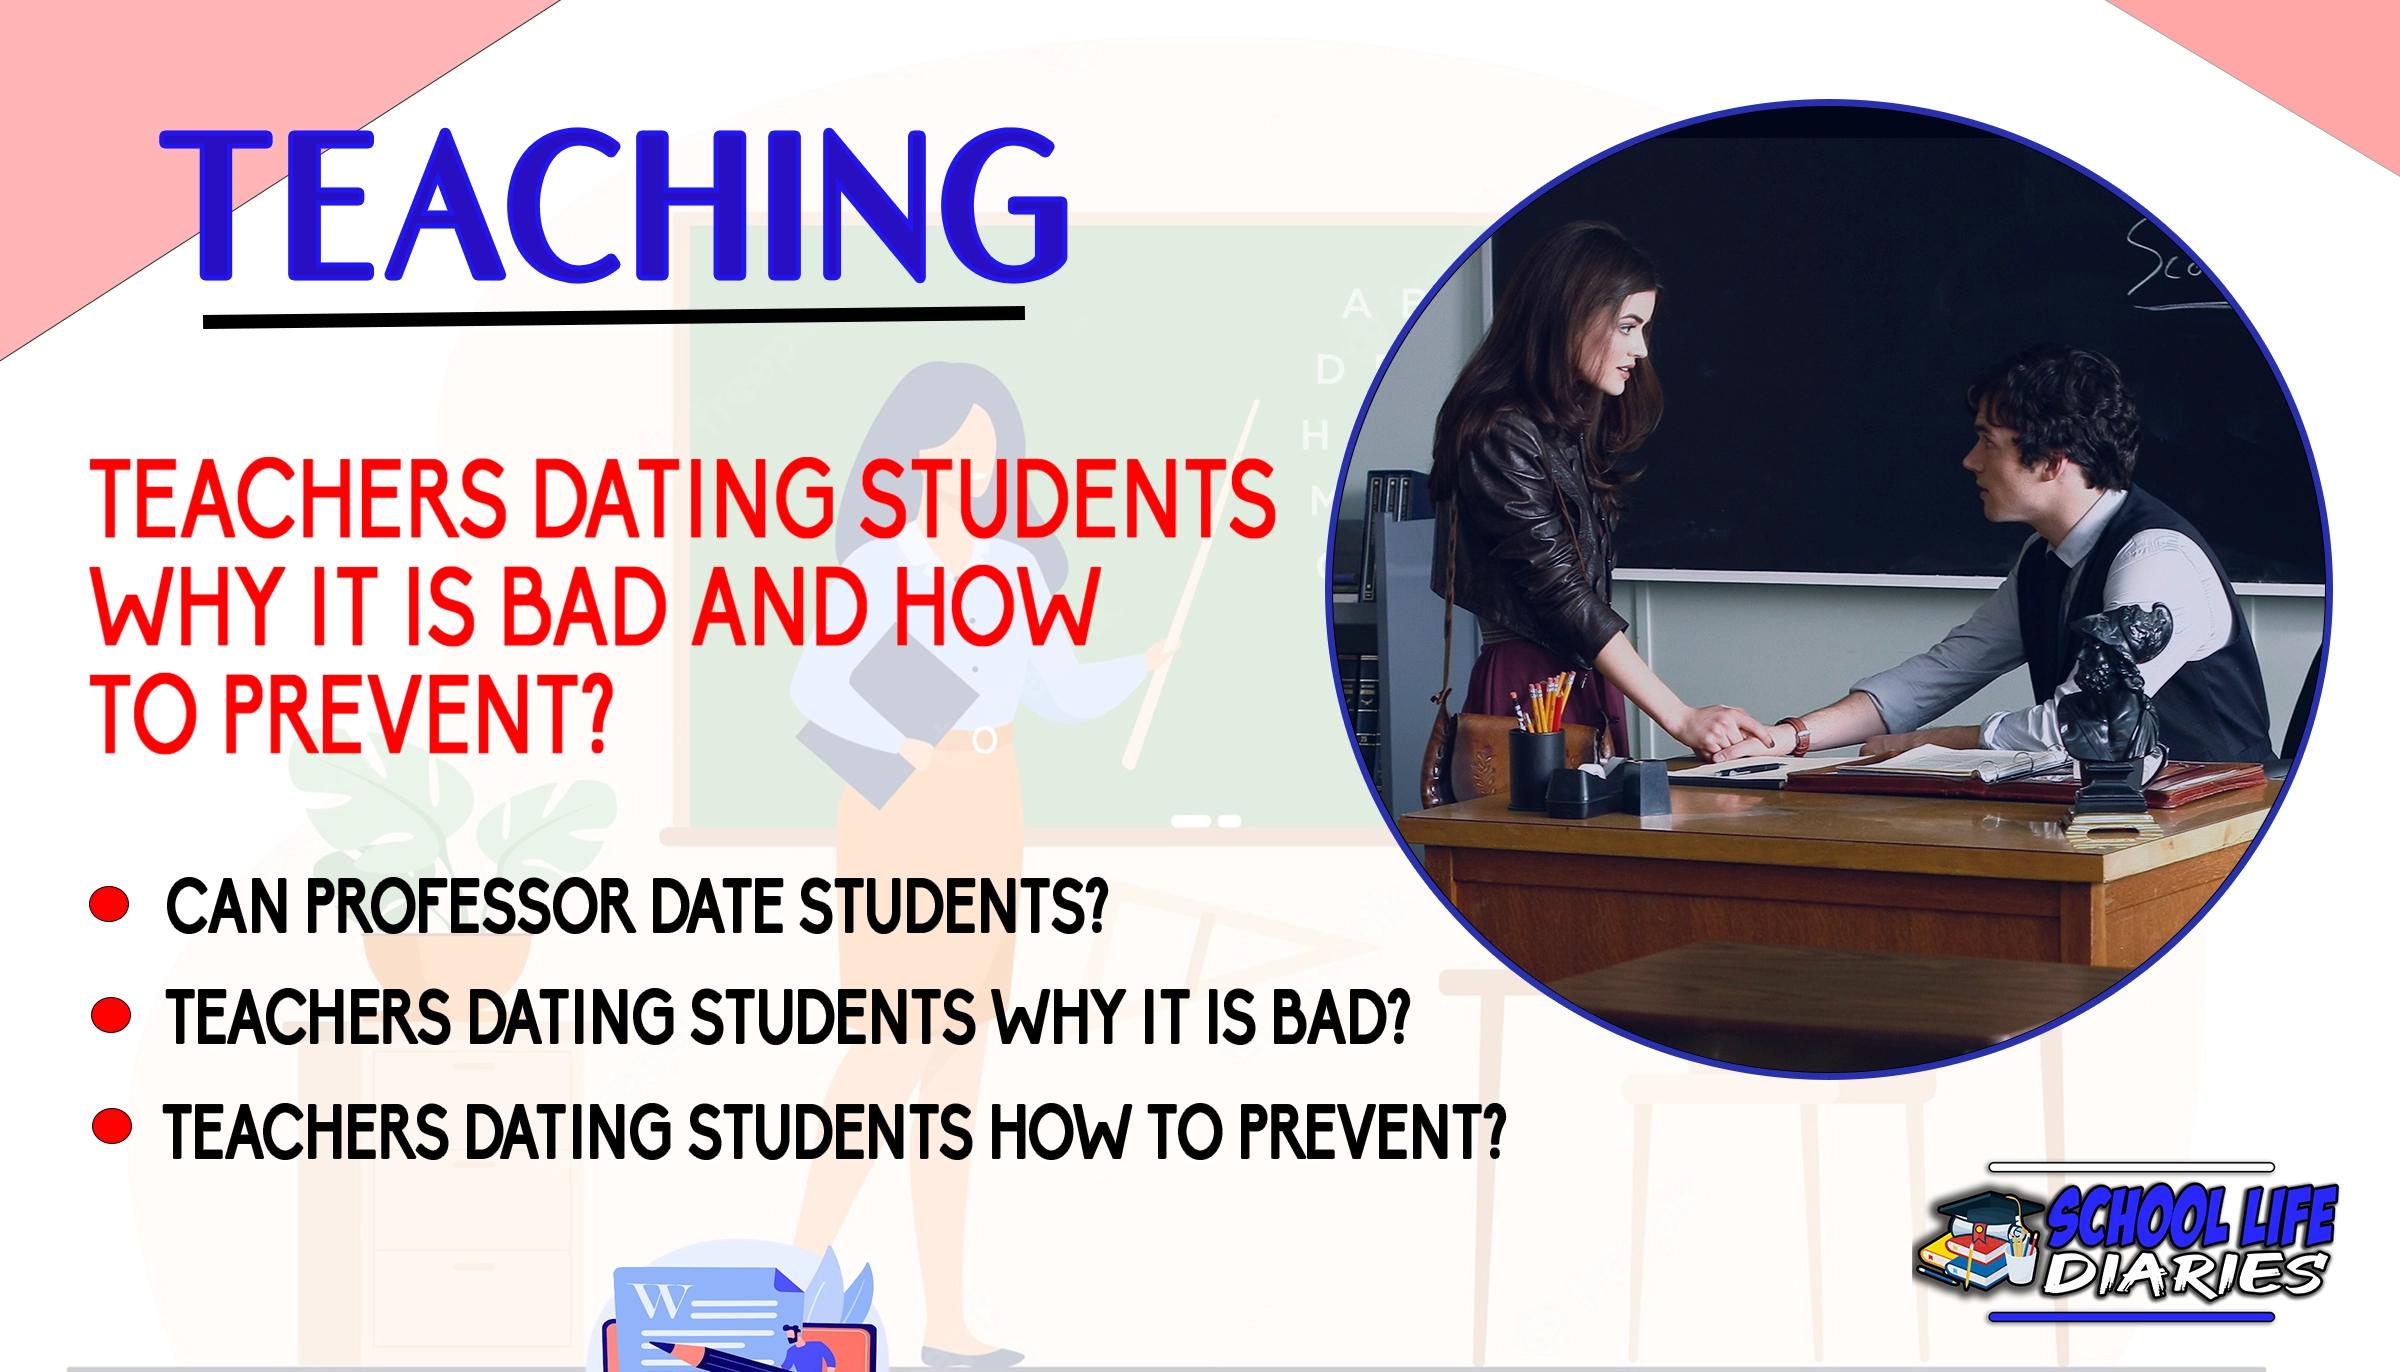 teachers-dating-students-why-it-is-bad-and-how-to-prevent-it-school